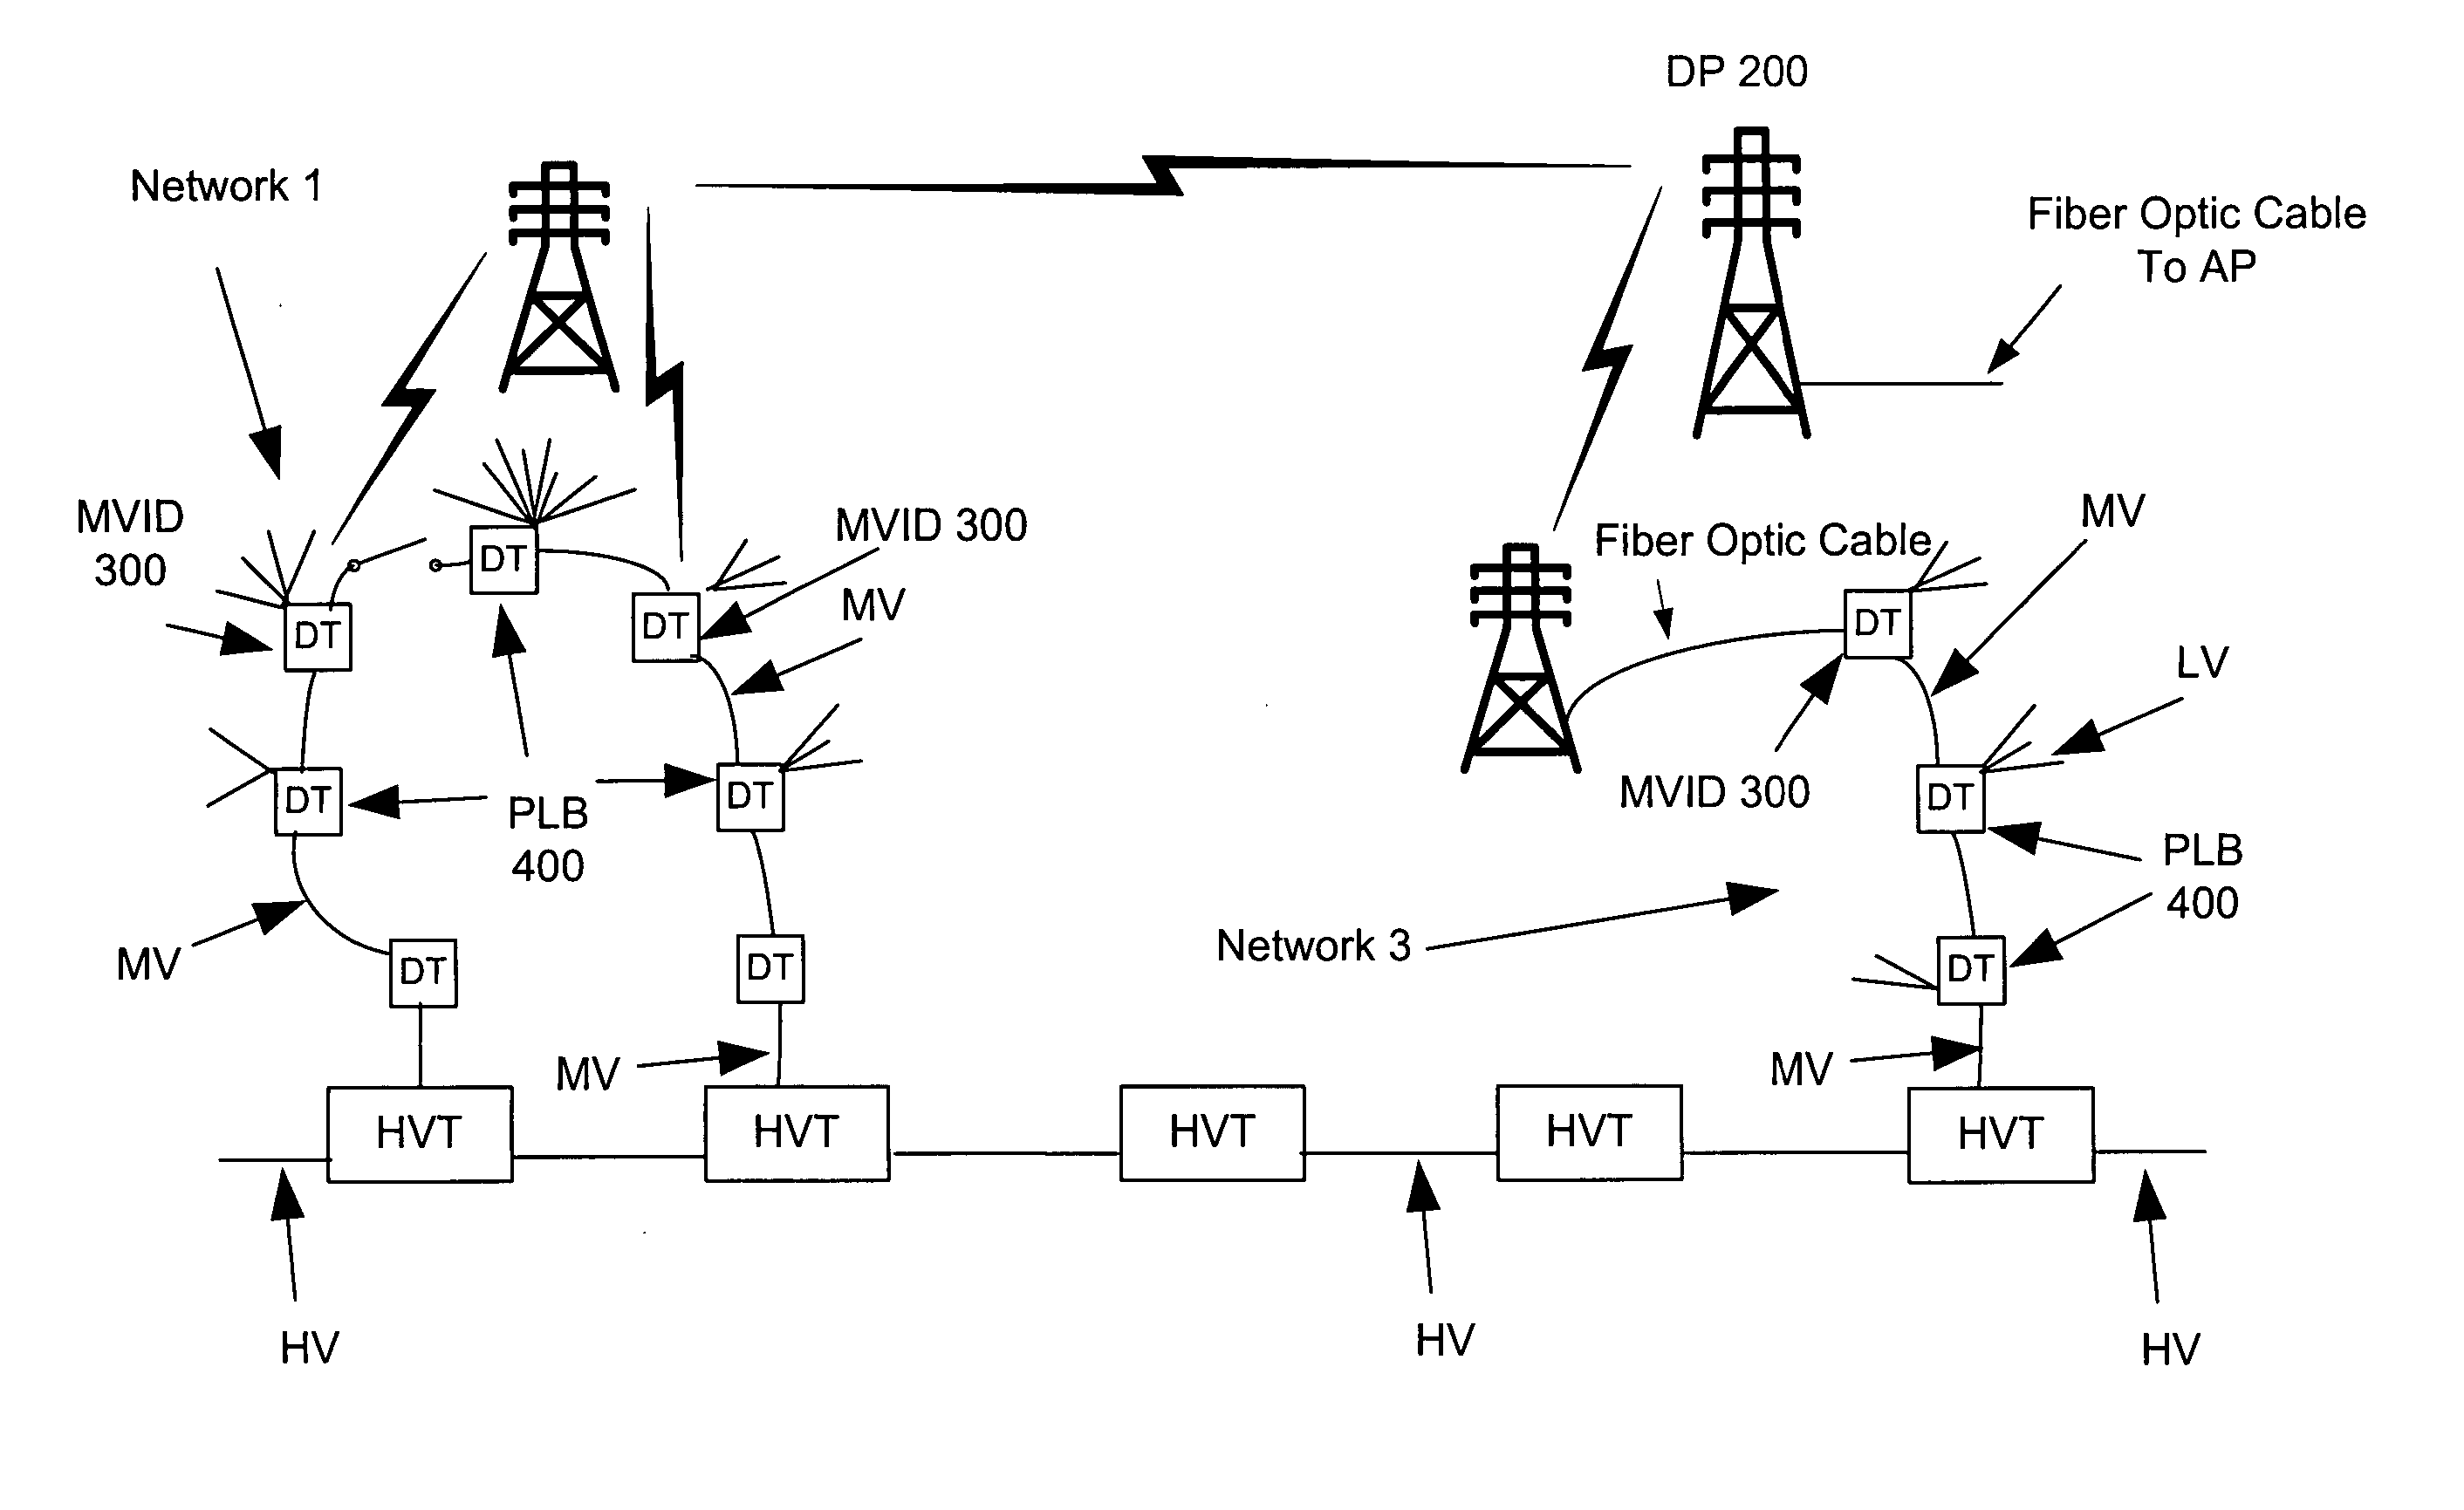 Power line communications device and method of use